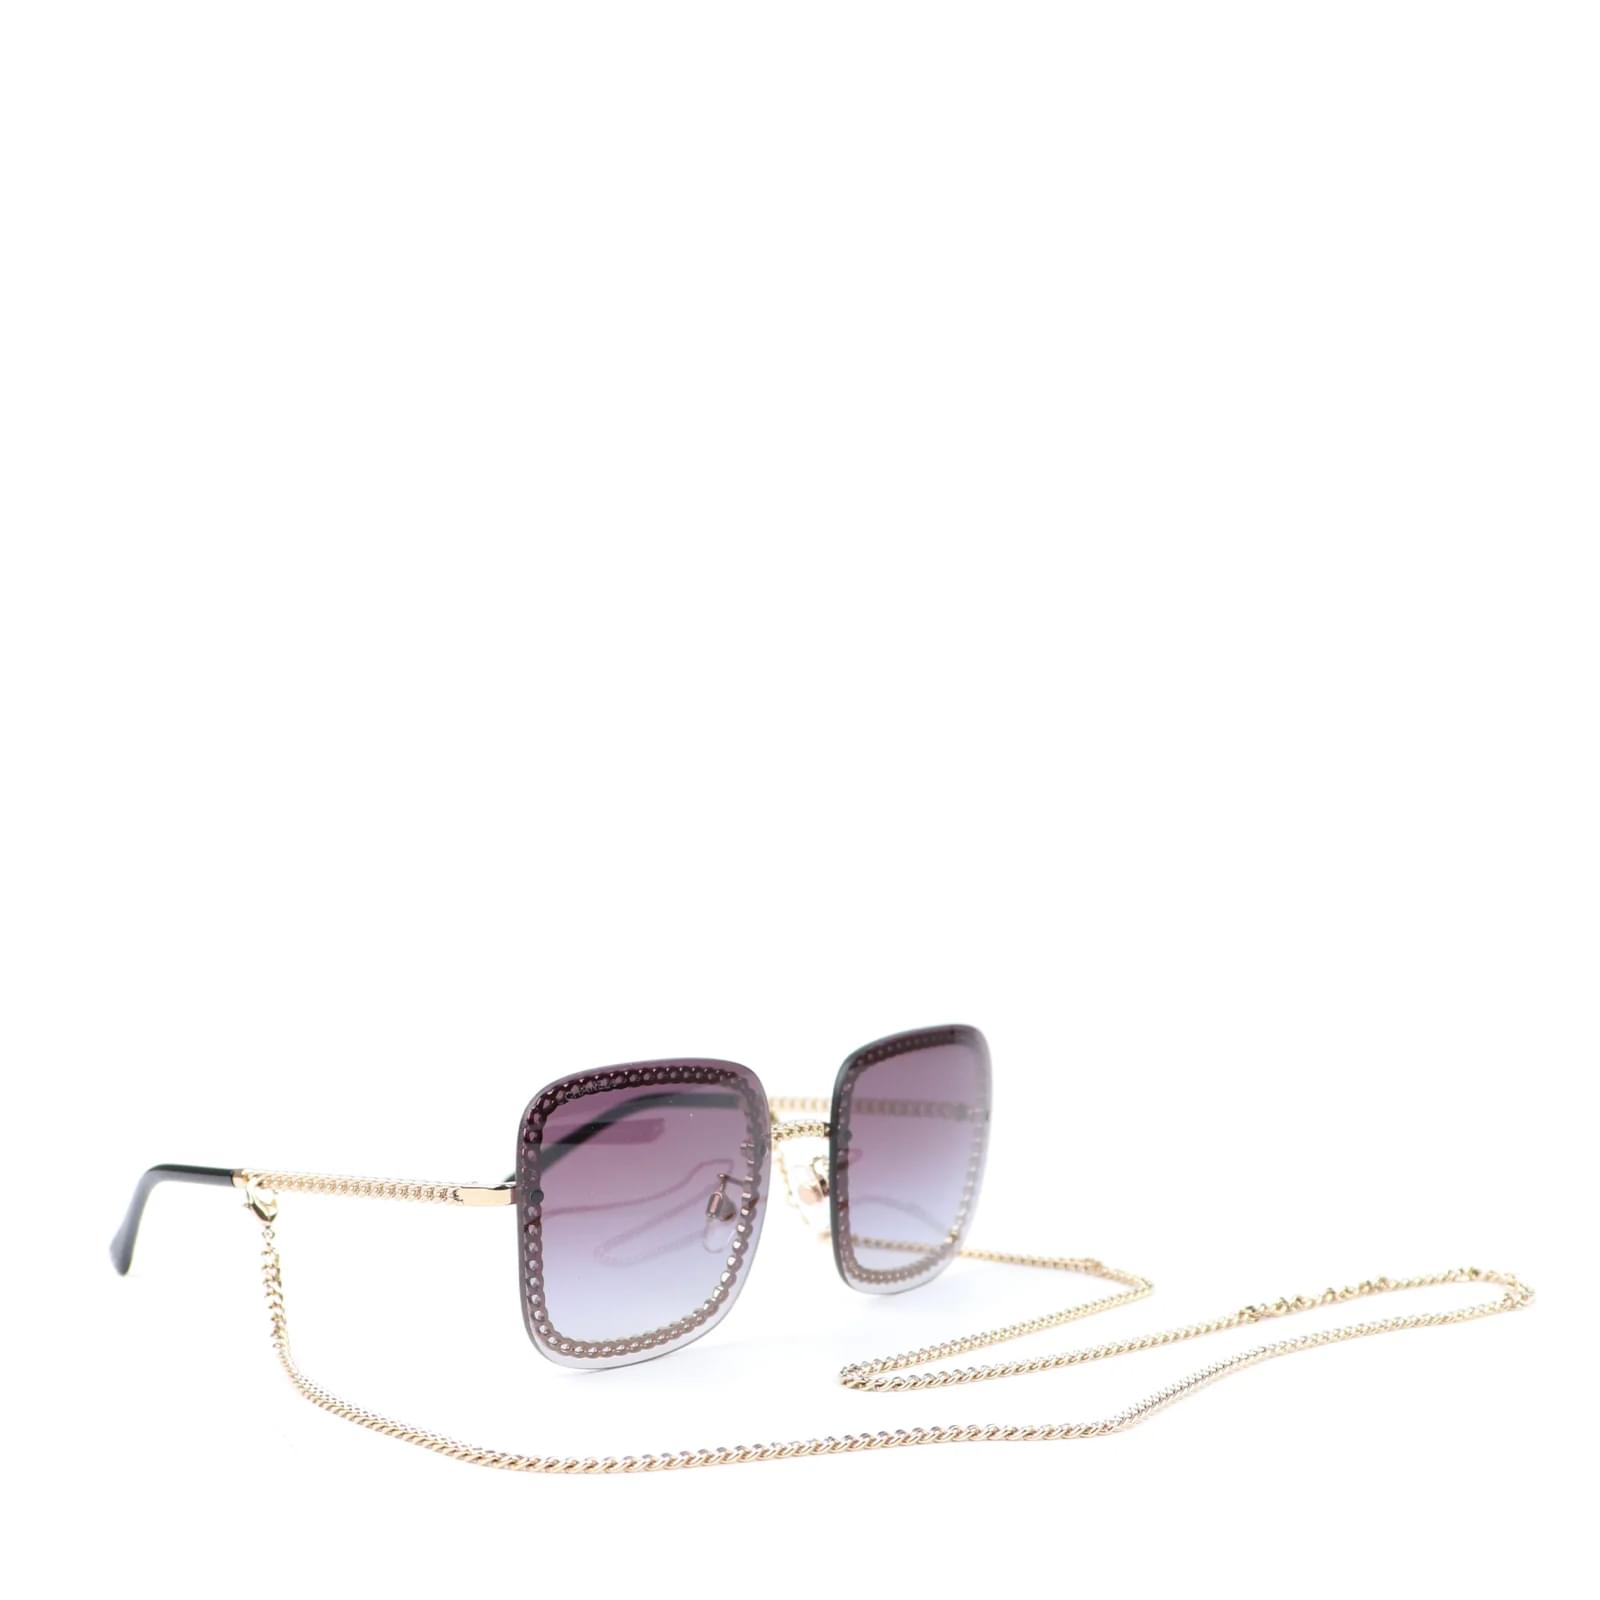 chanel square sunglasses with chain